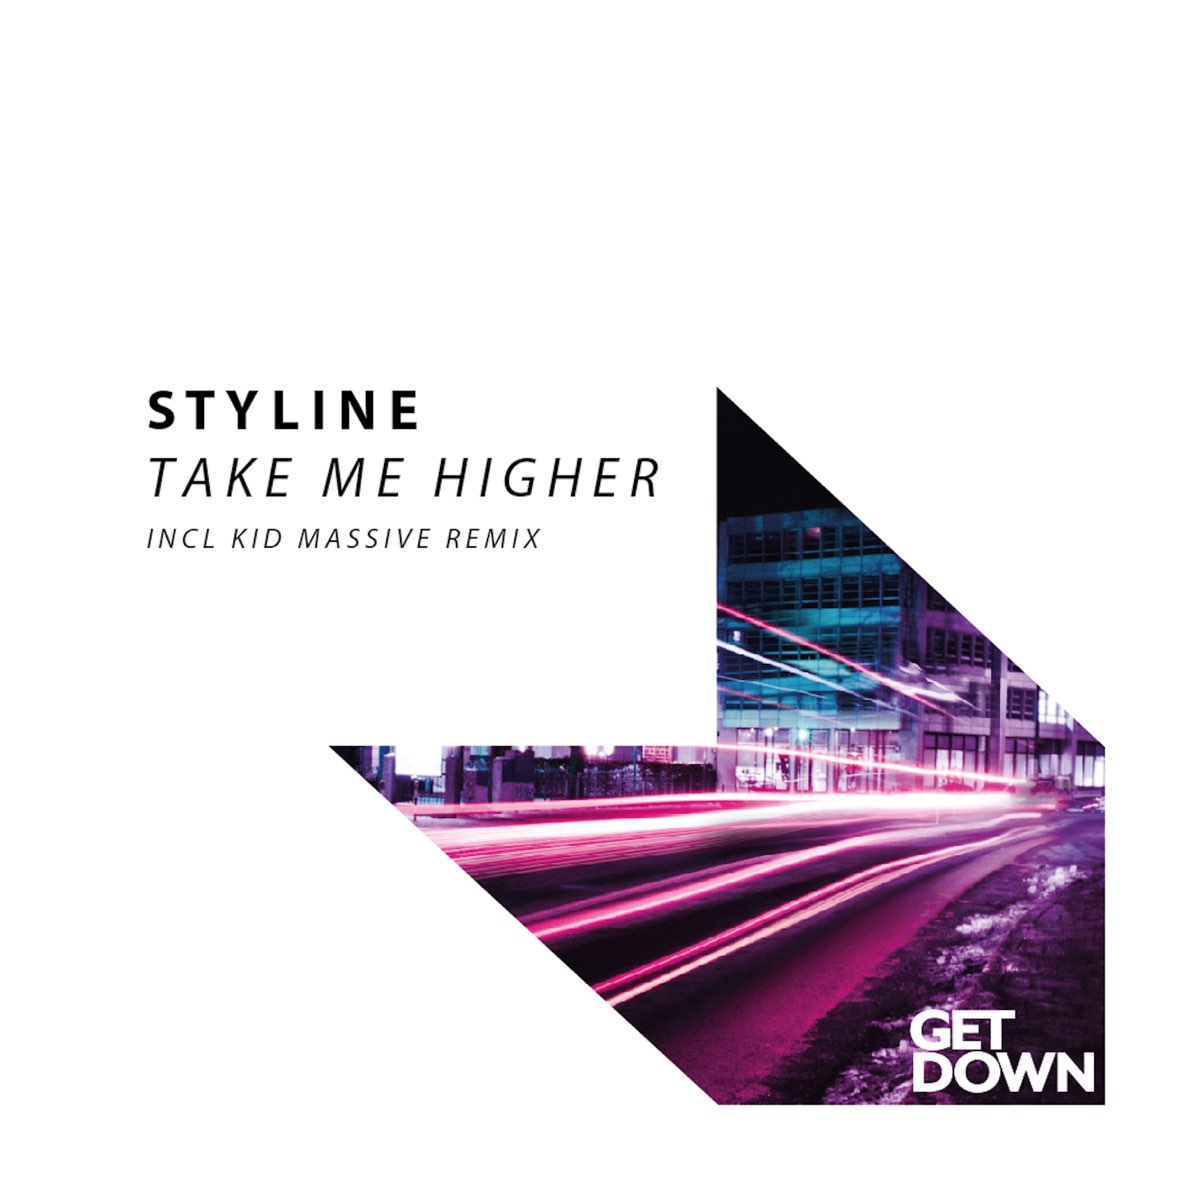 Cube remix. Taking me higher Deepscale. Styline what you want (Original Mix).